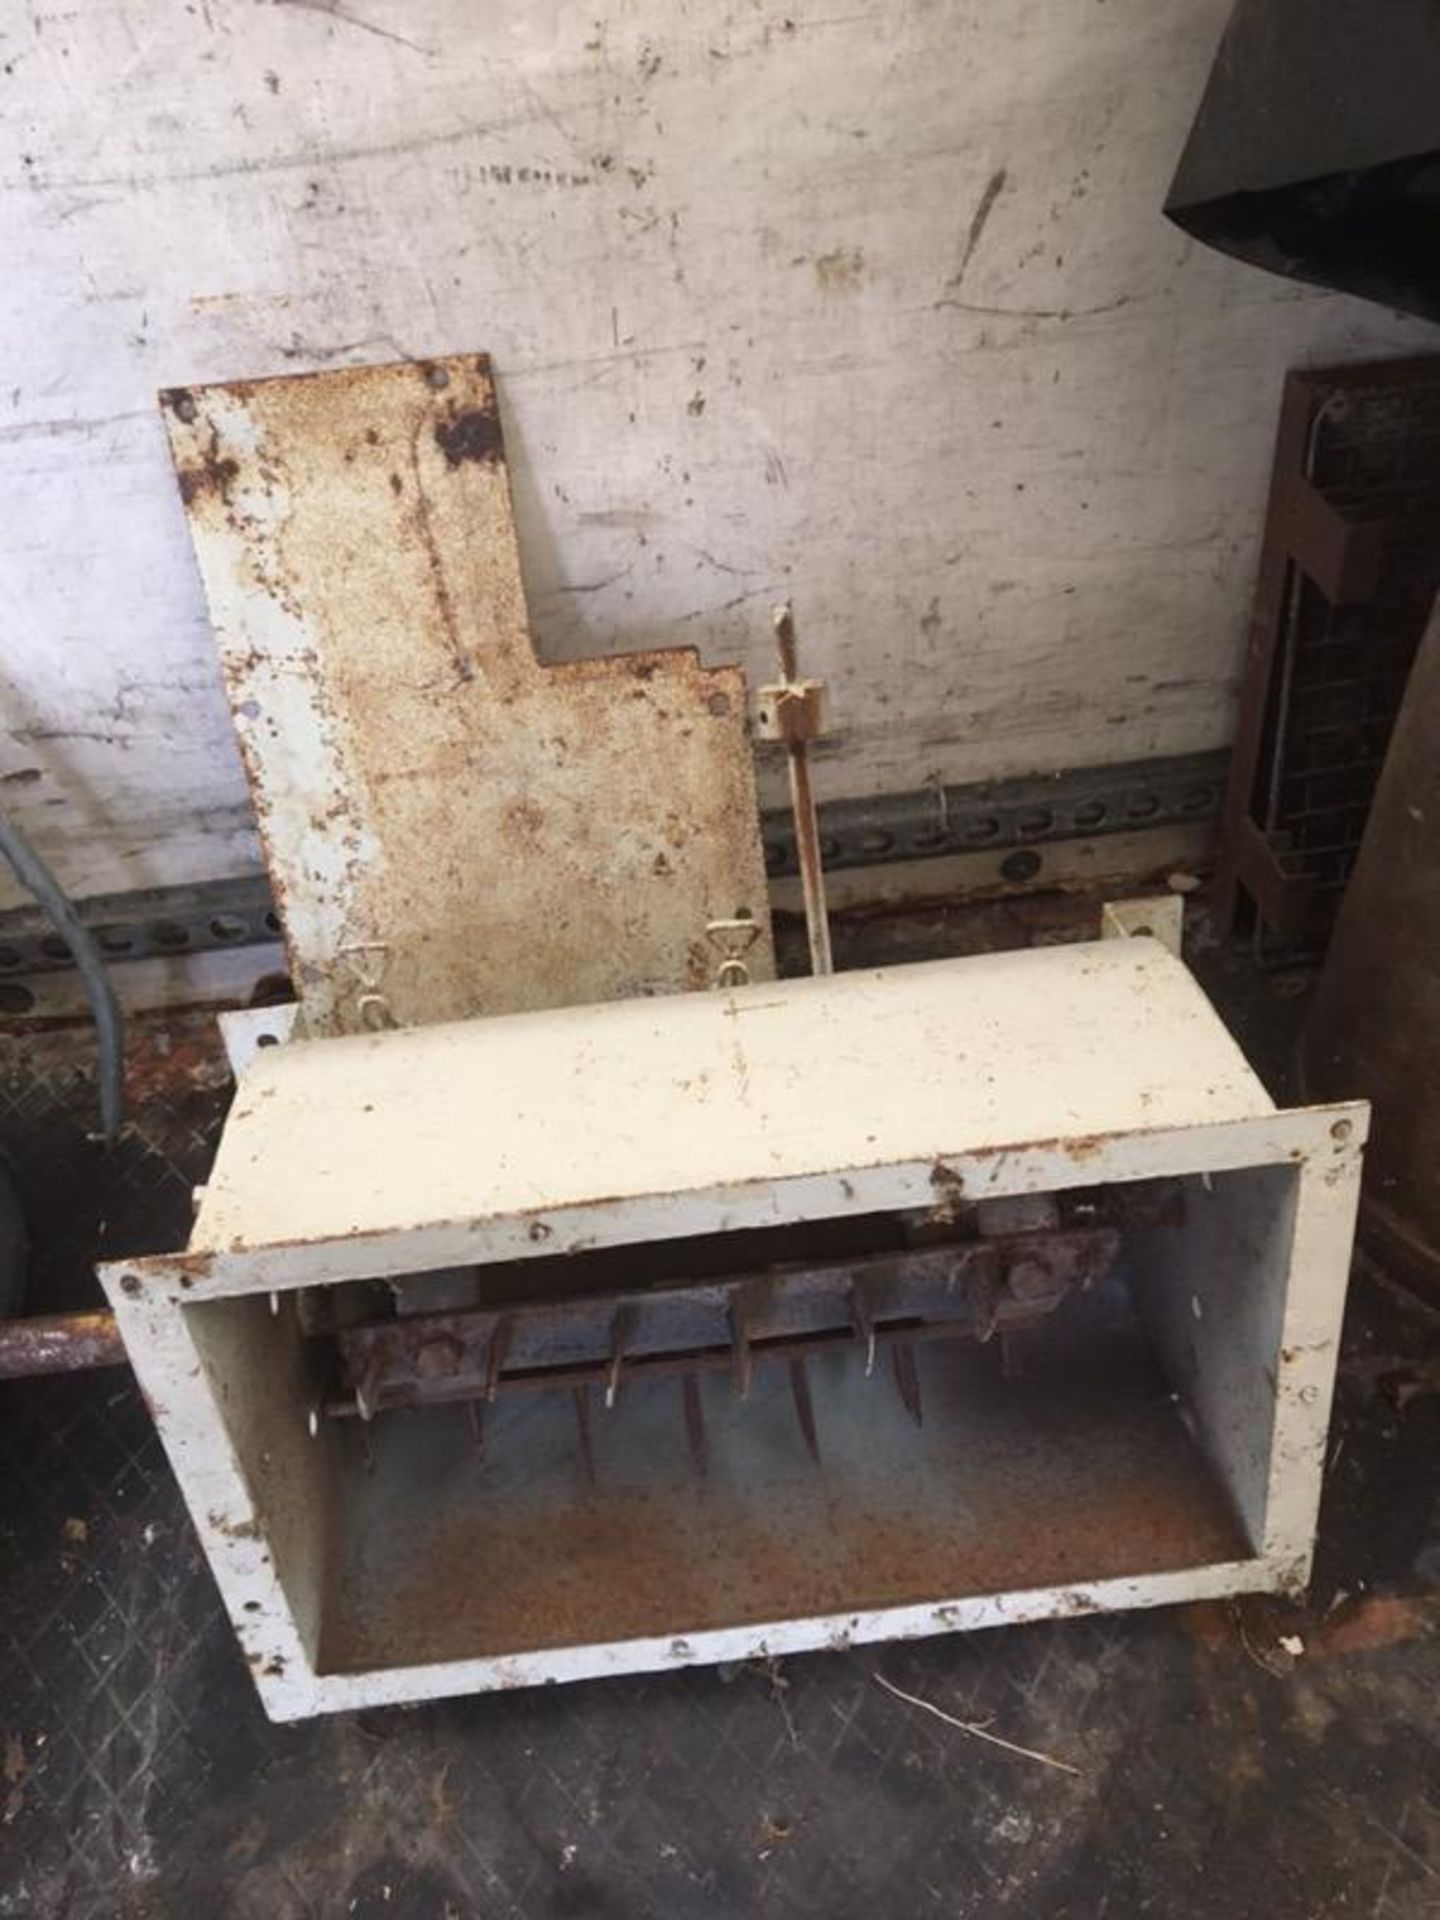 Deawner - Blair deawner 600mm long x 315mm wide x 470mm high with worn fingers. Needs 2 No new